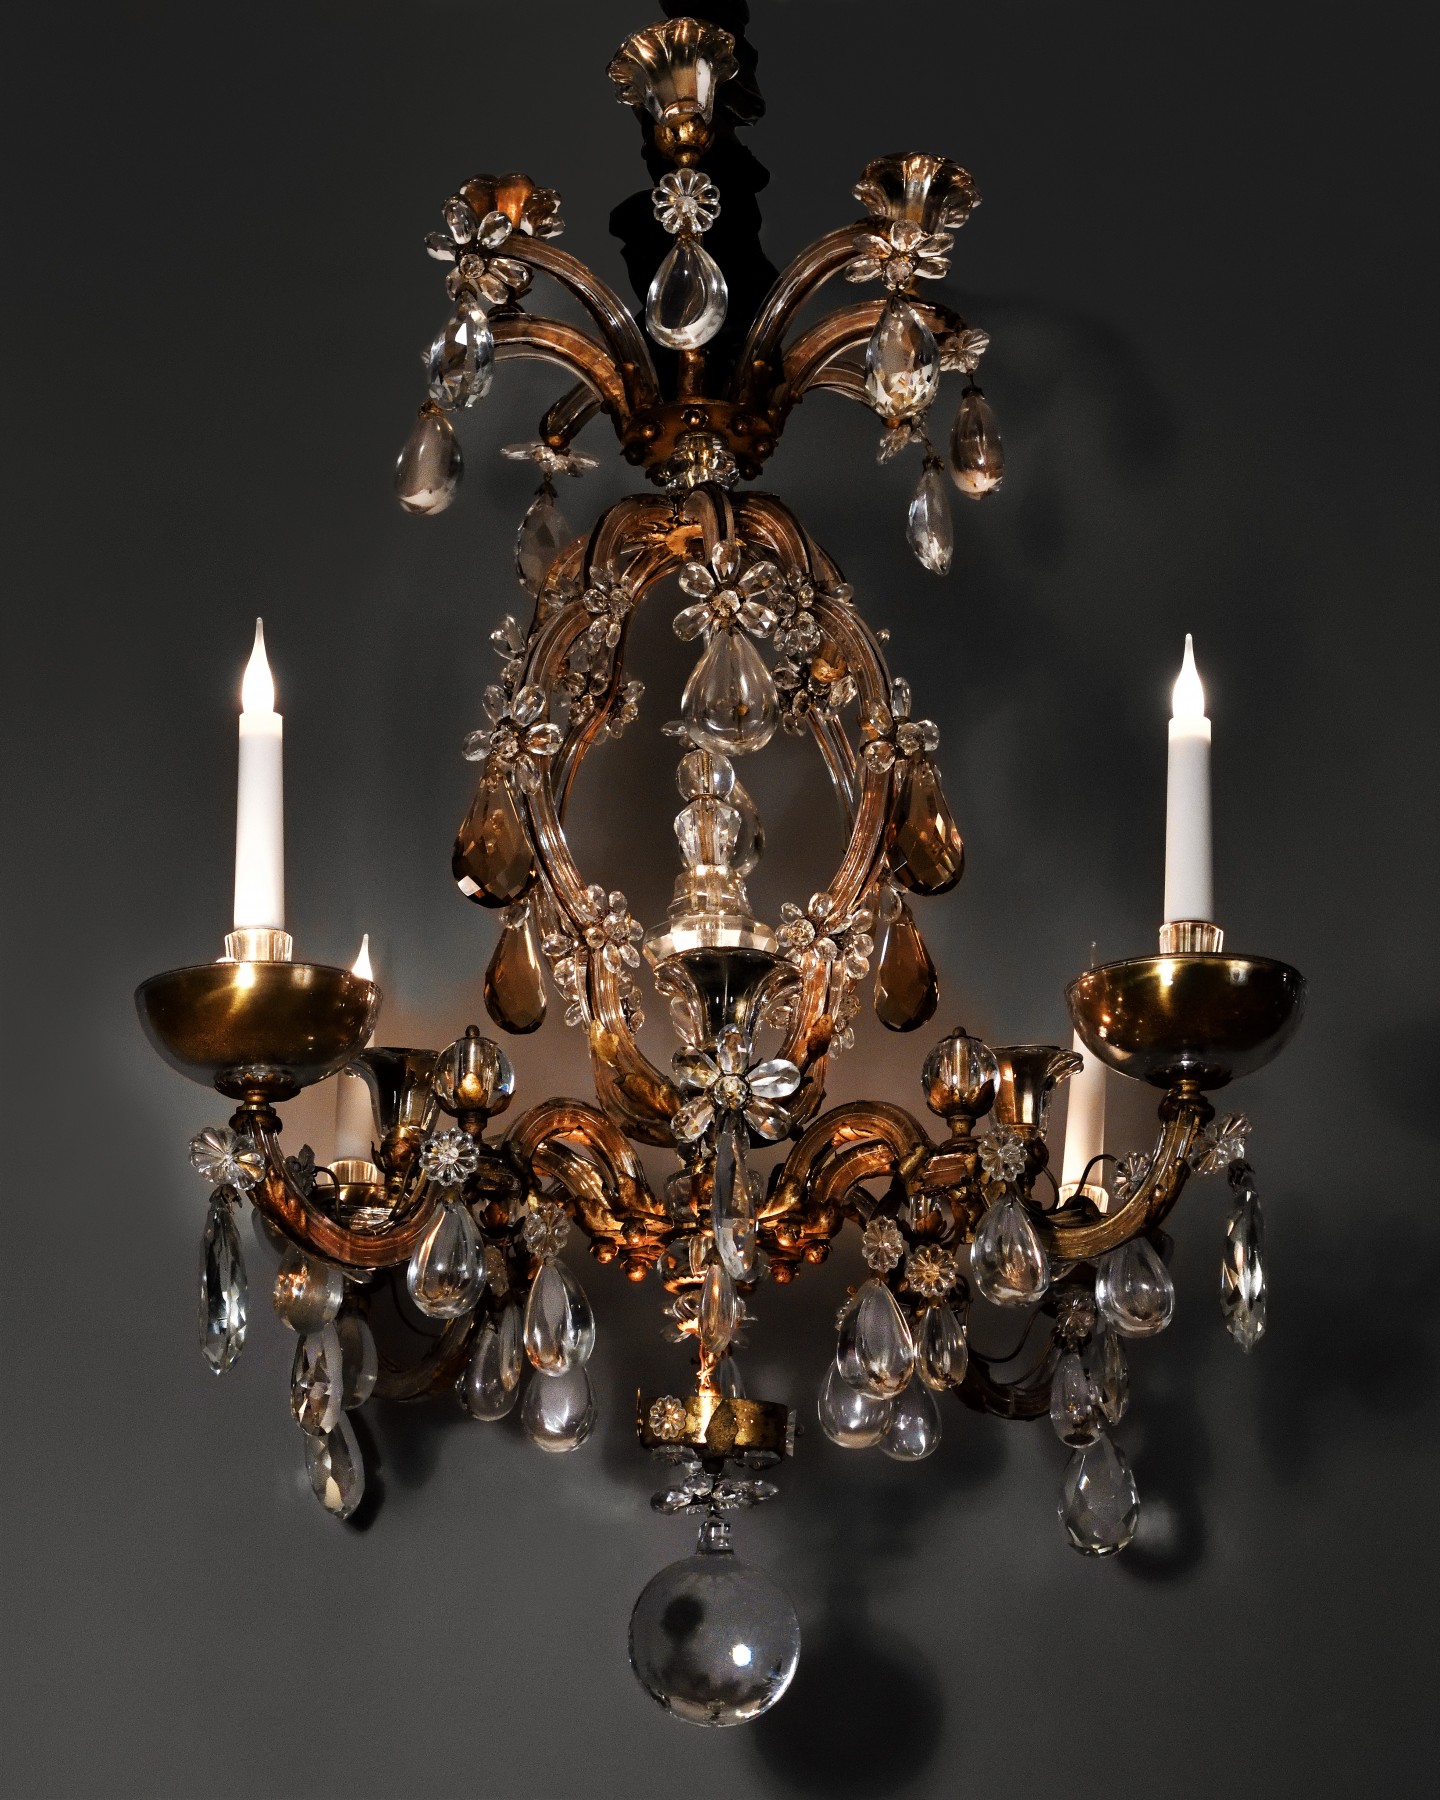 Vintage Circa 1920 French Crystal Flowers Chandelier